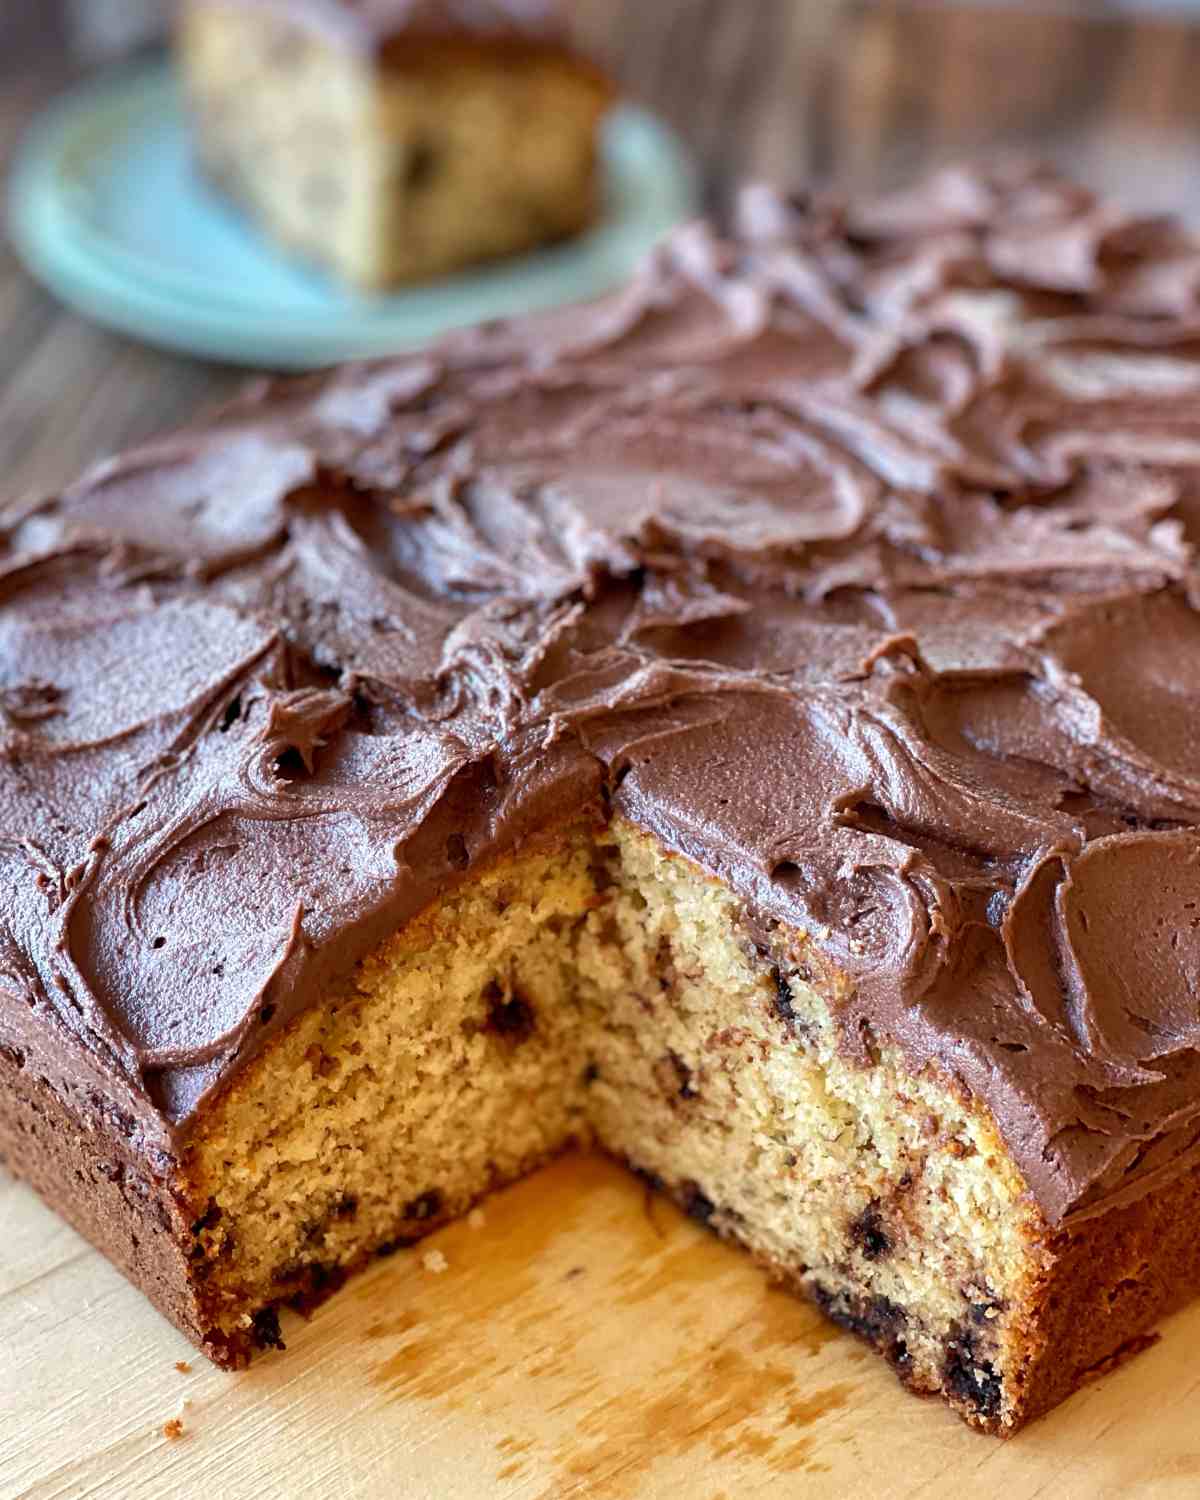 Iced banana chocolate chip cake with one portion removed.